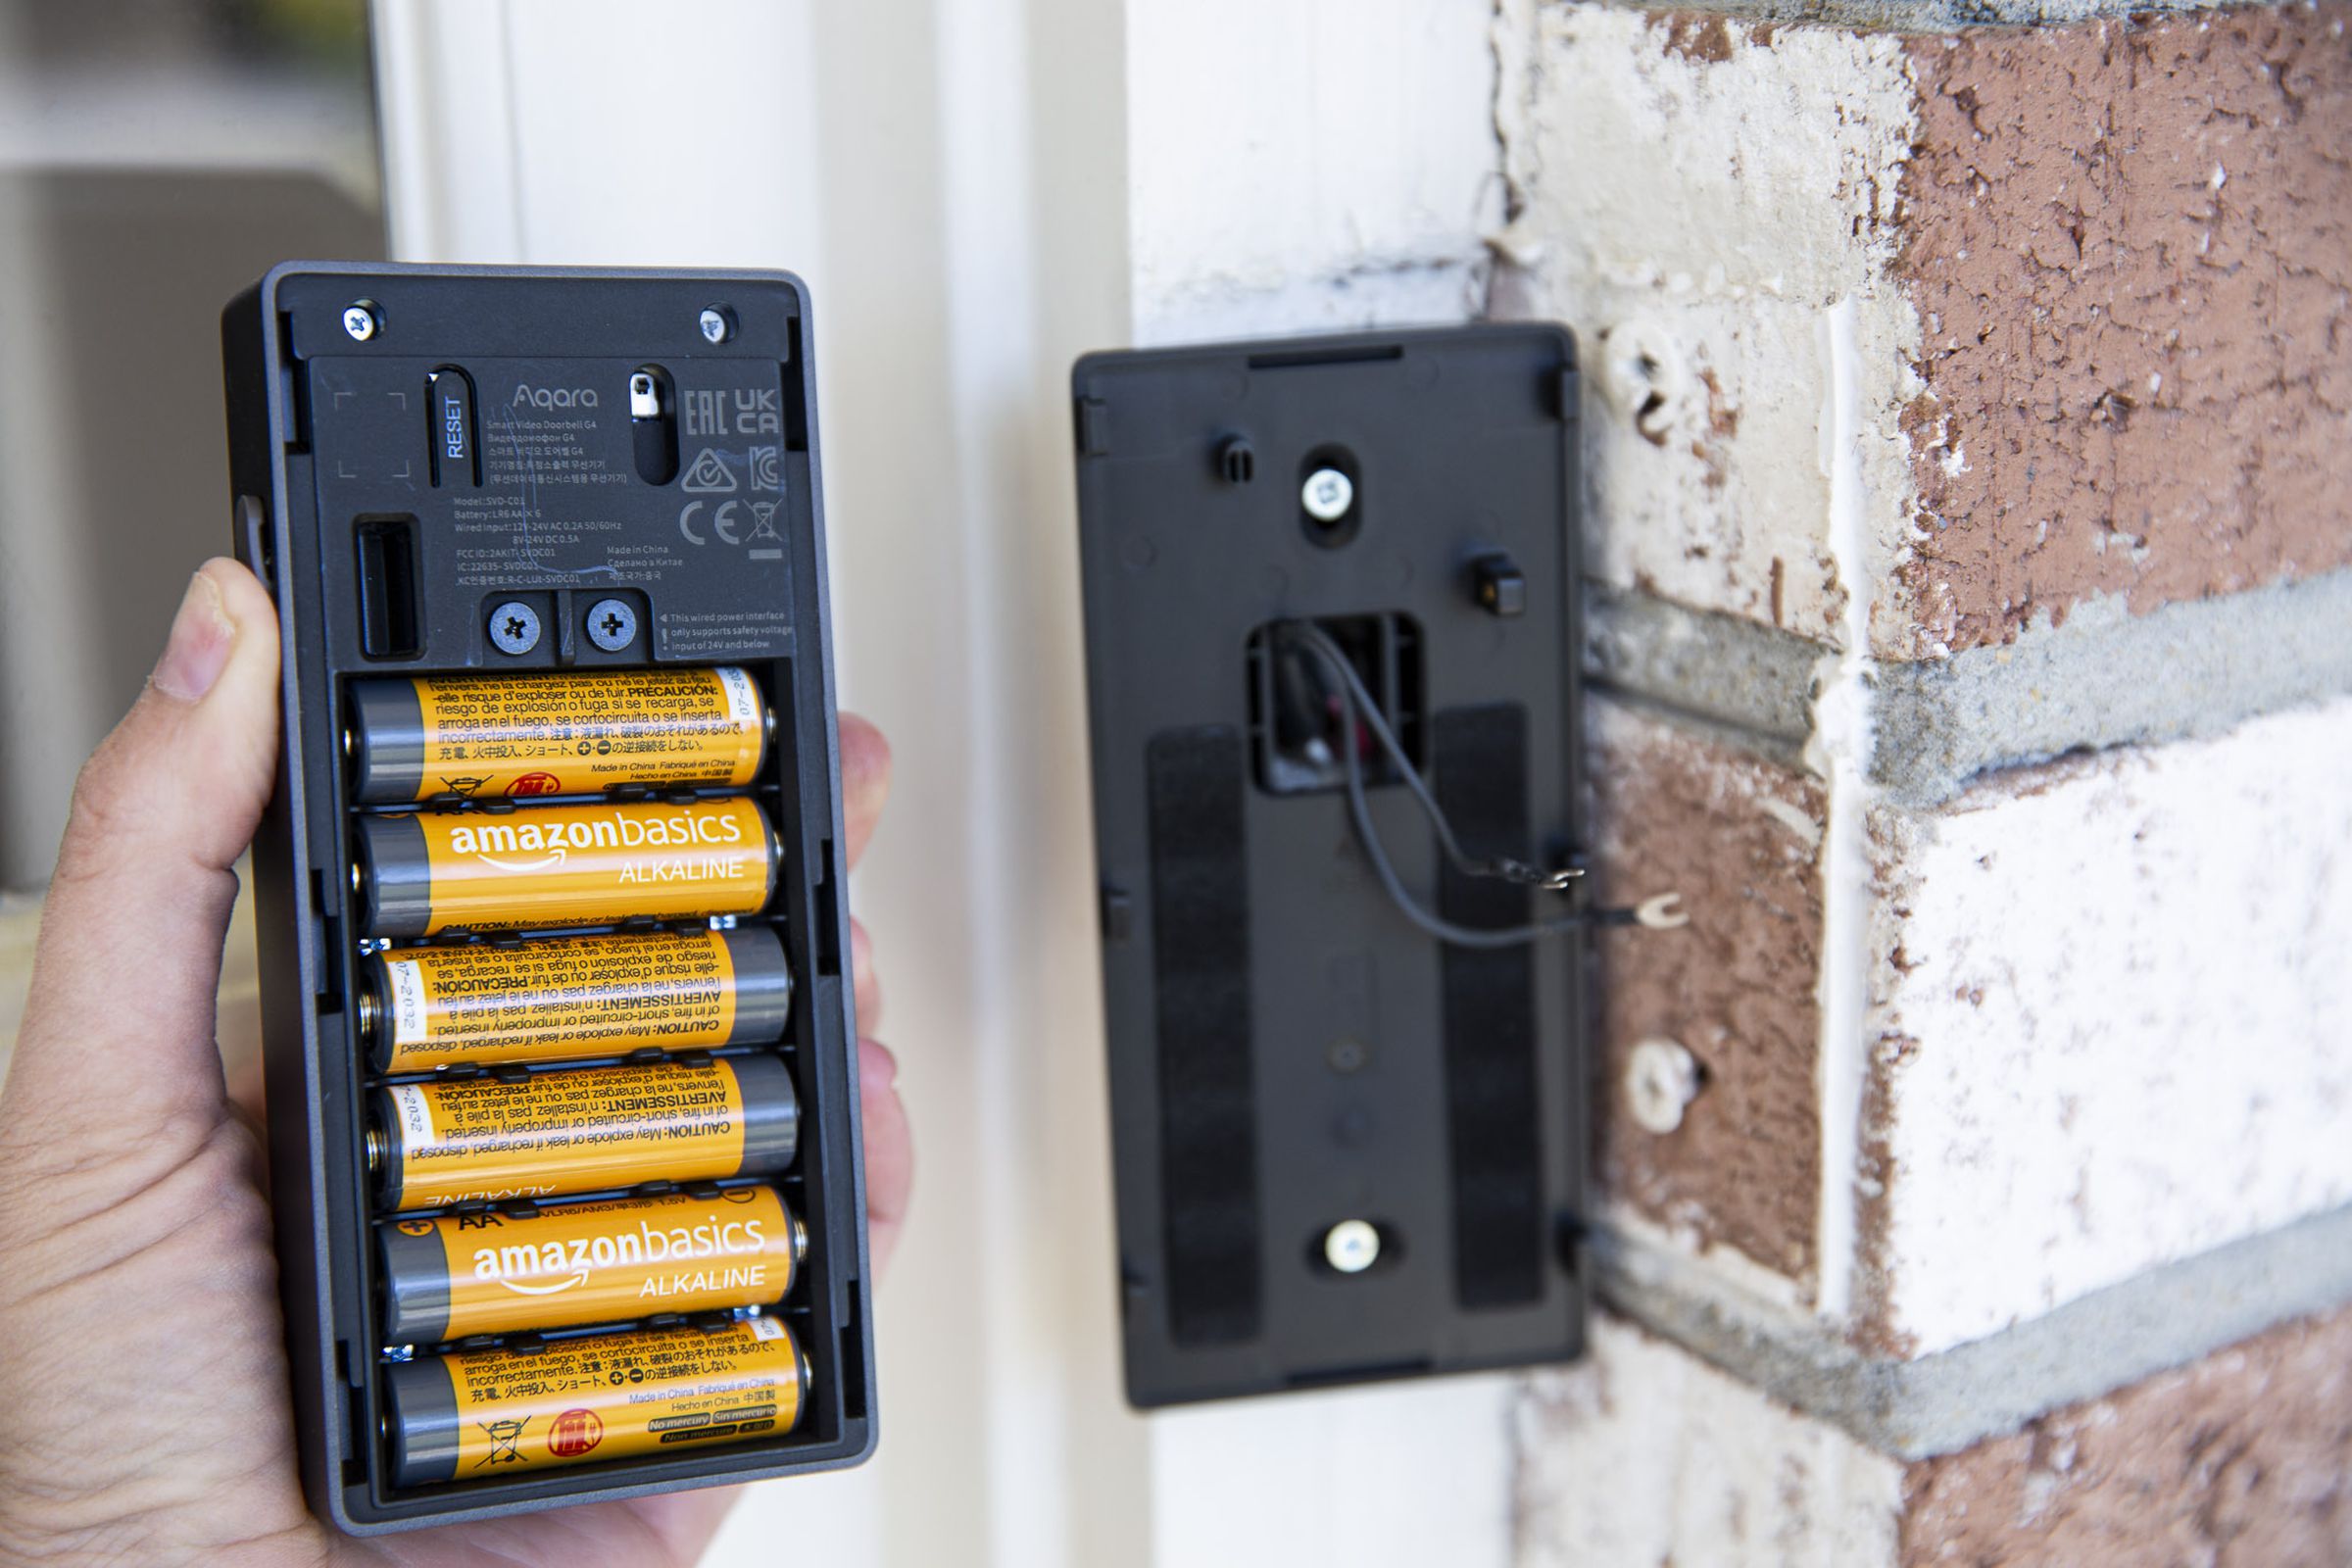 The G4 can be powered by wires as a true wired doorbell, or by six AA batteries, or both!